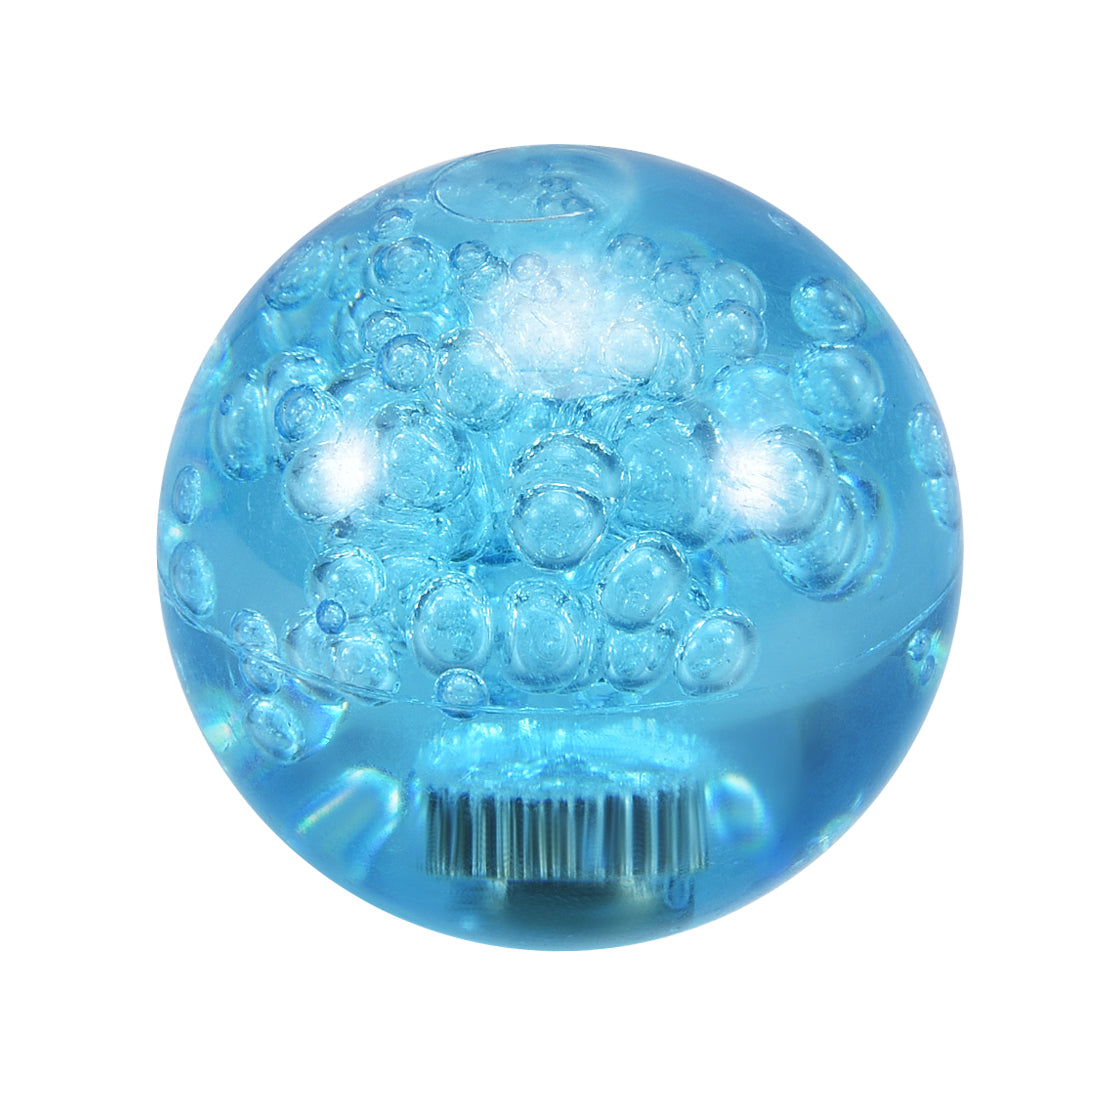 uxcell Uxcell Joystick Ball Top Handle Rocker Round Head Arcade Fighting Game DIY Parts Replacement Crystal Blue